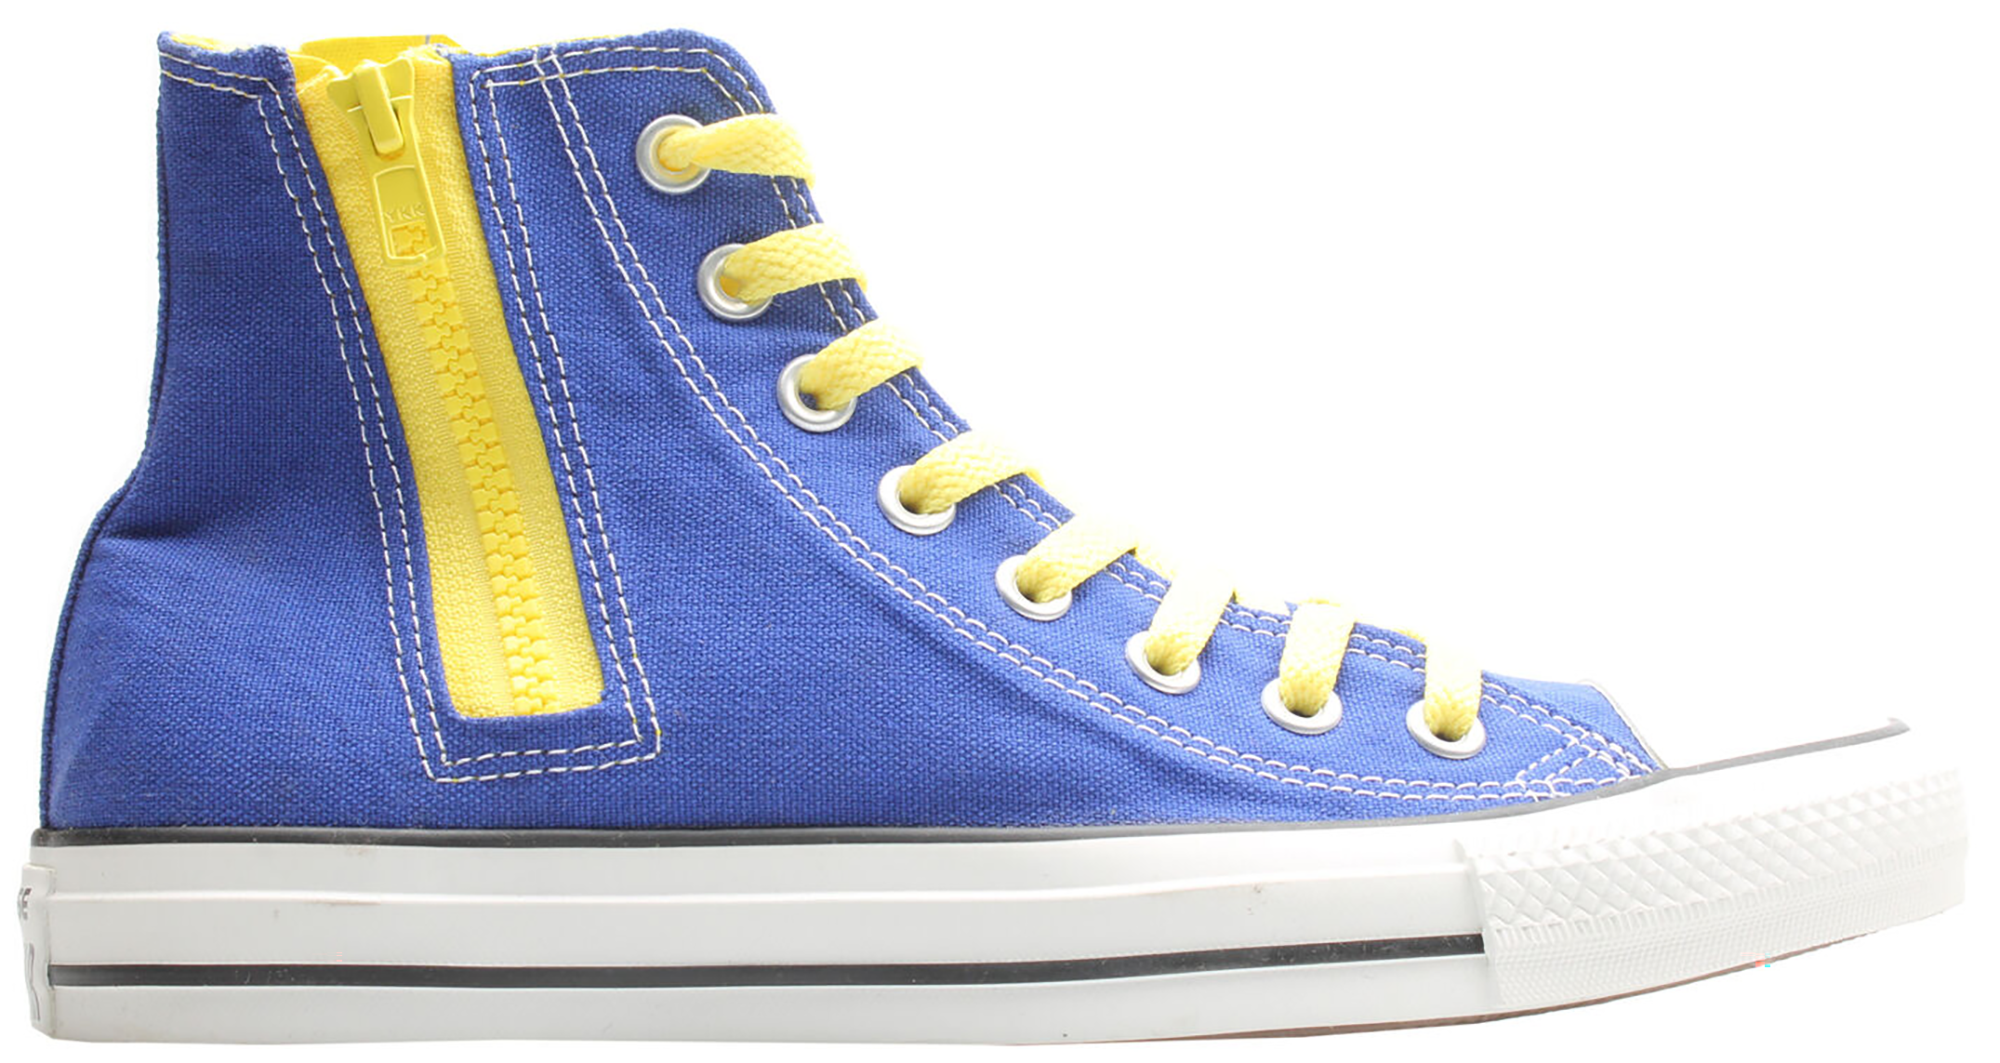 blue red yellow converse